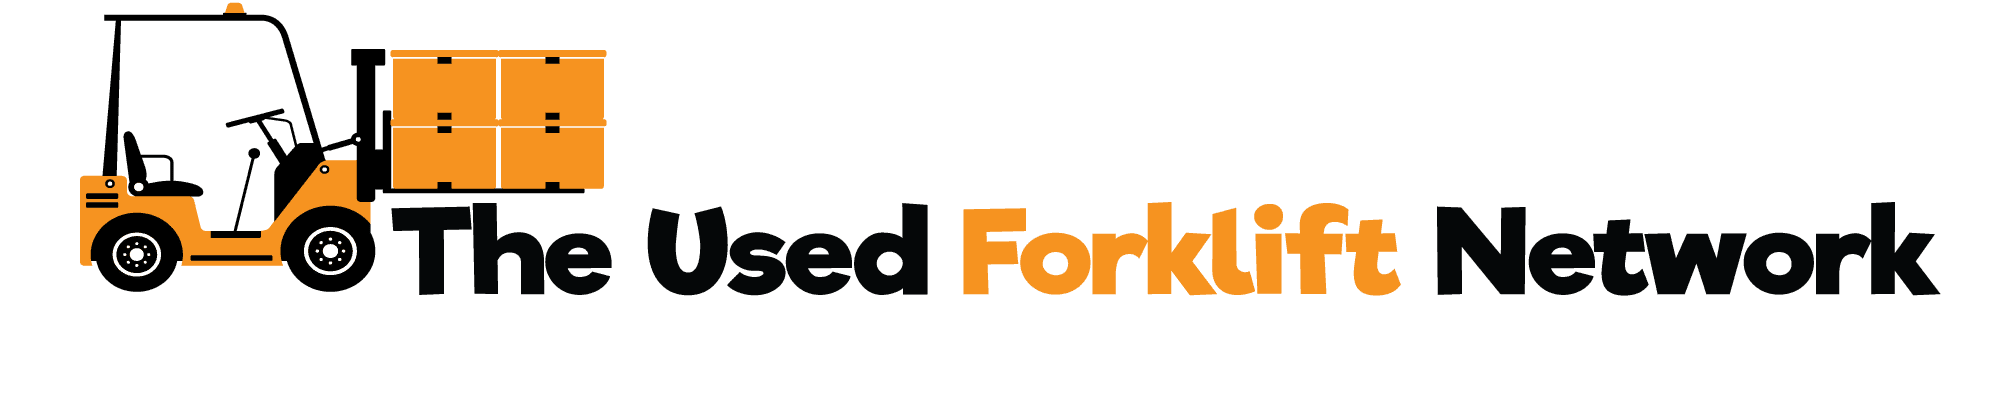 The Used Forklift Network